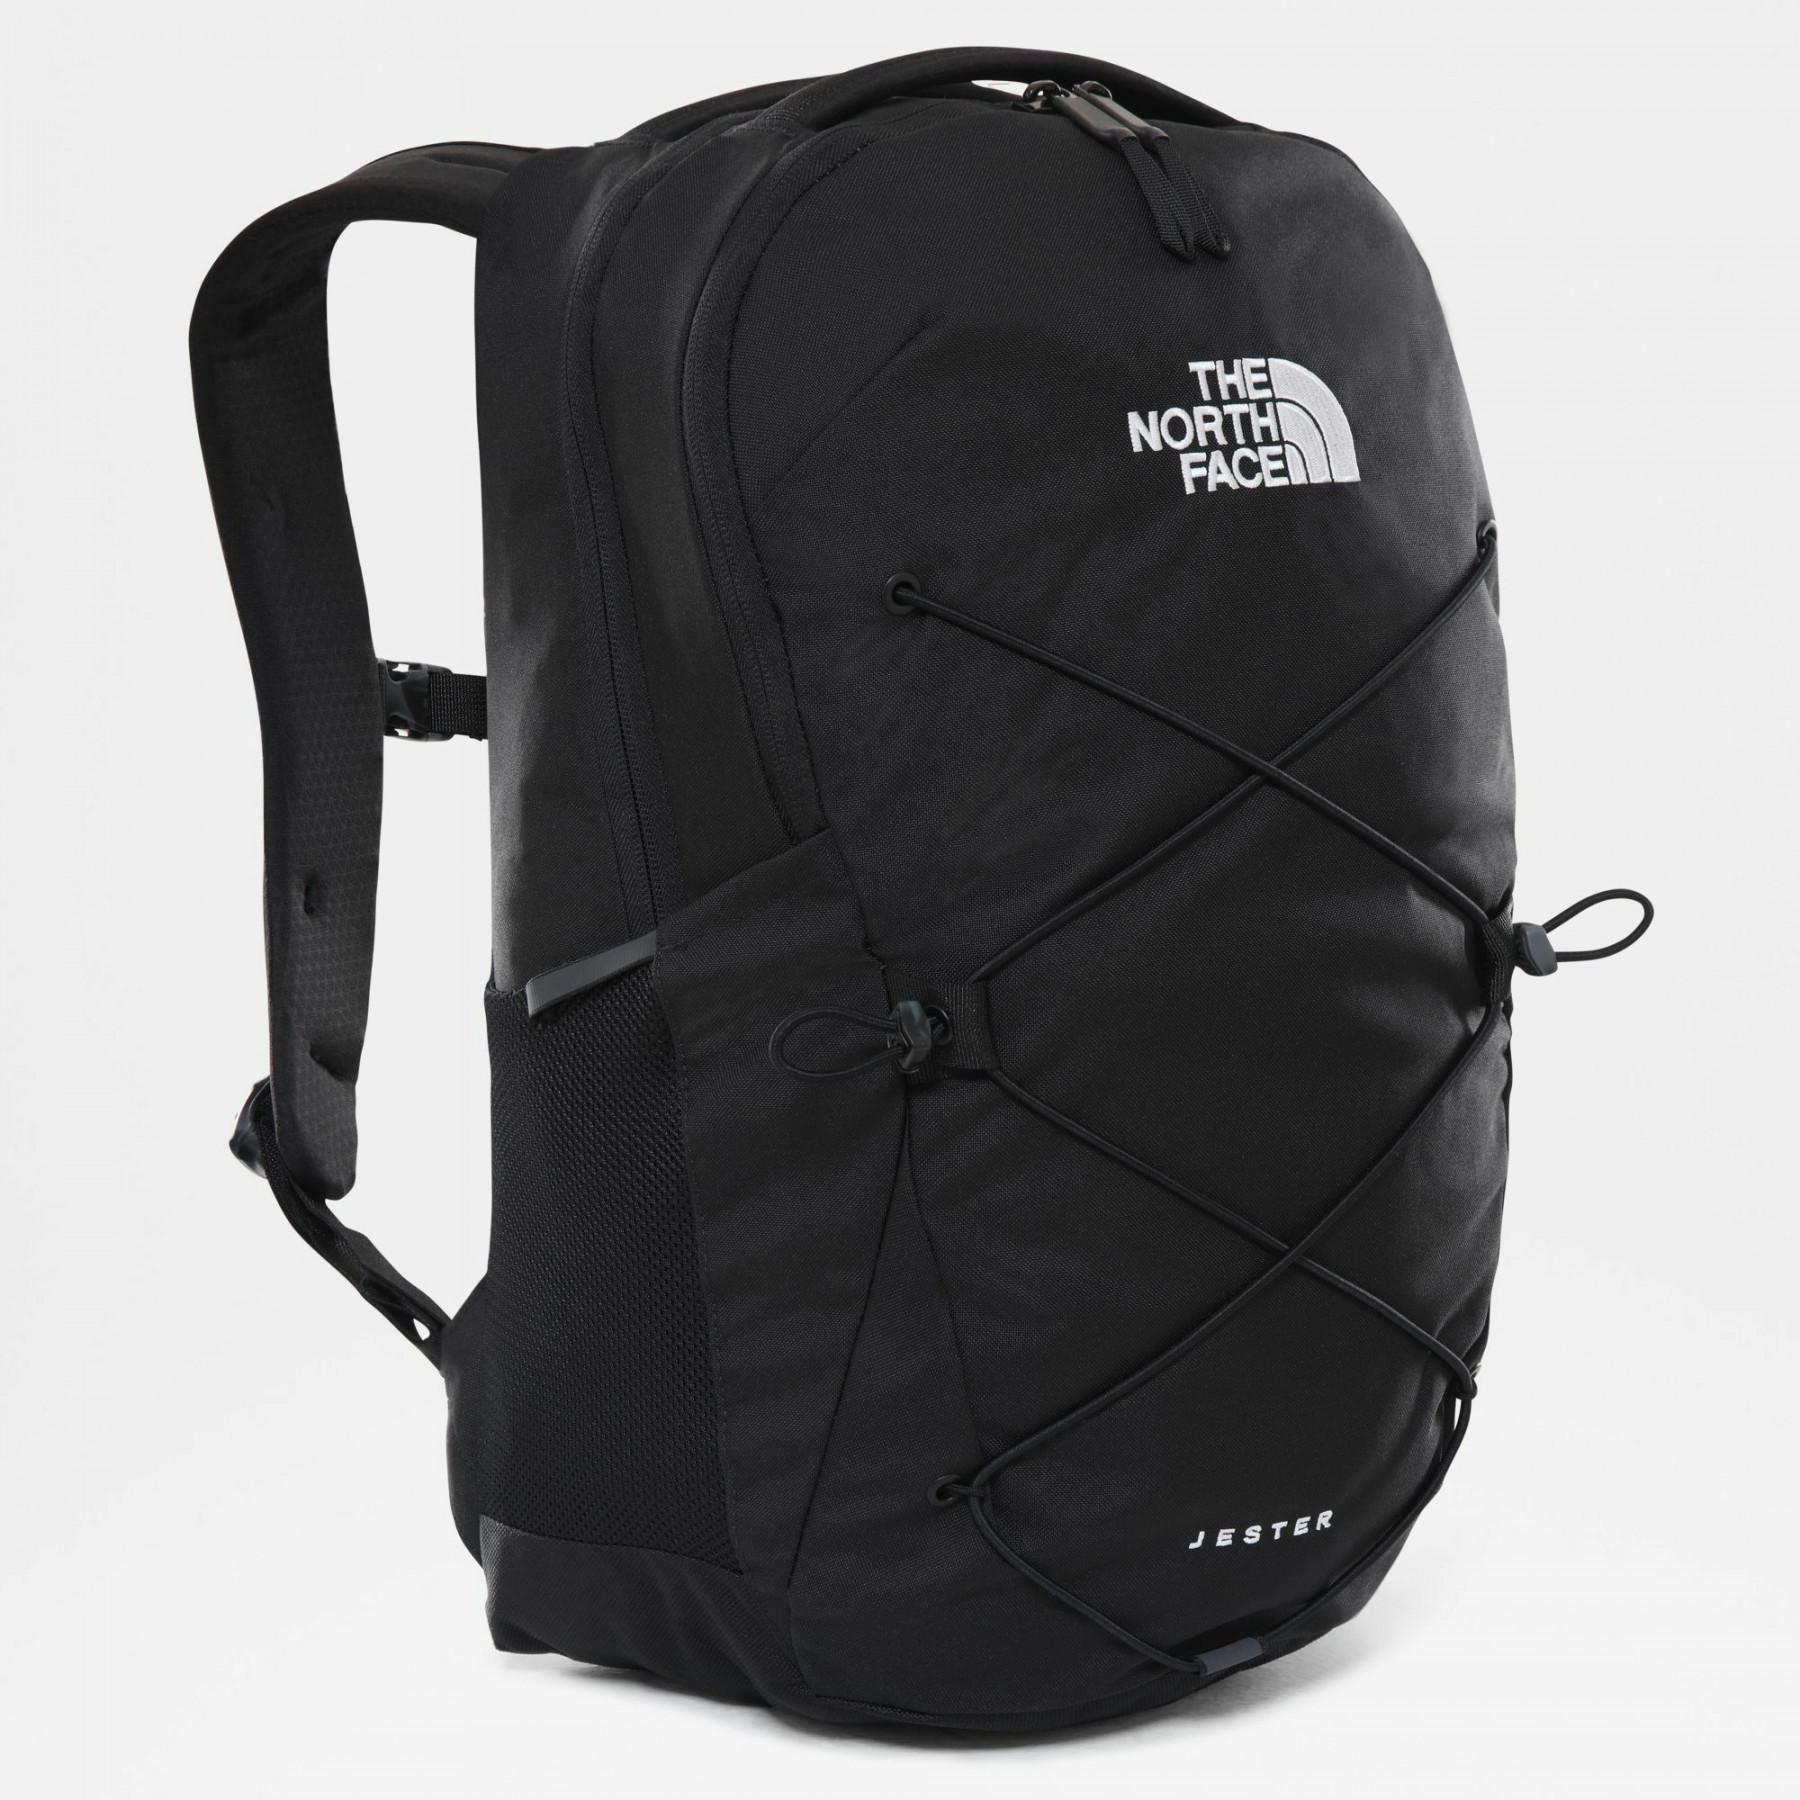 Sac à dos The North Face Jester